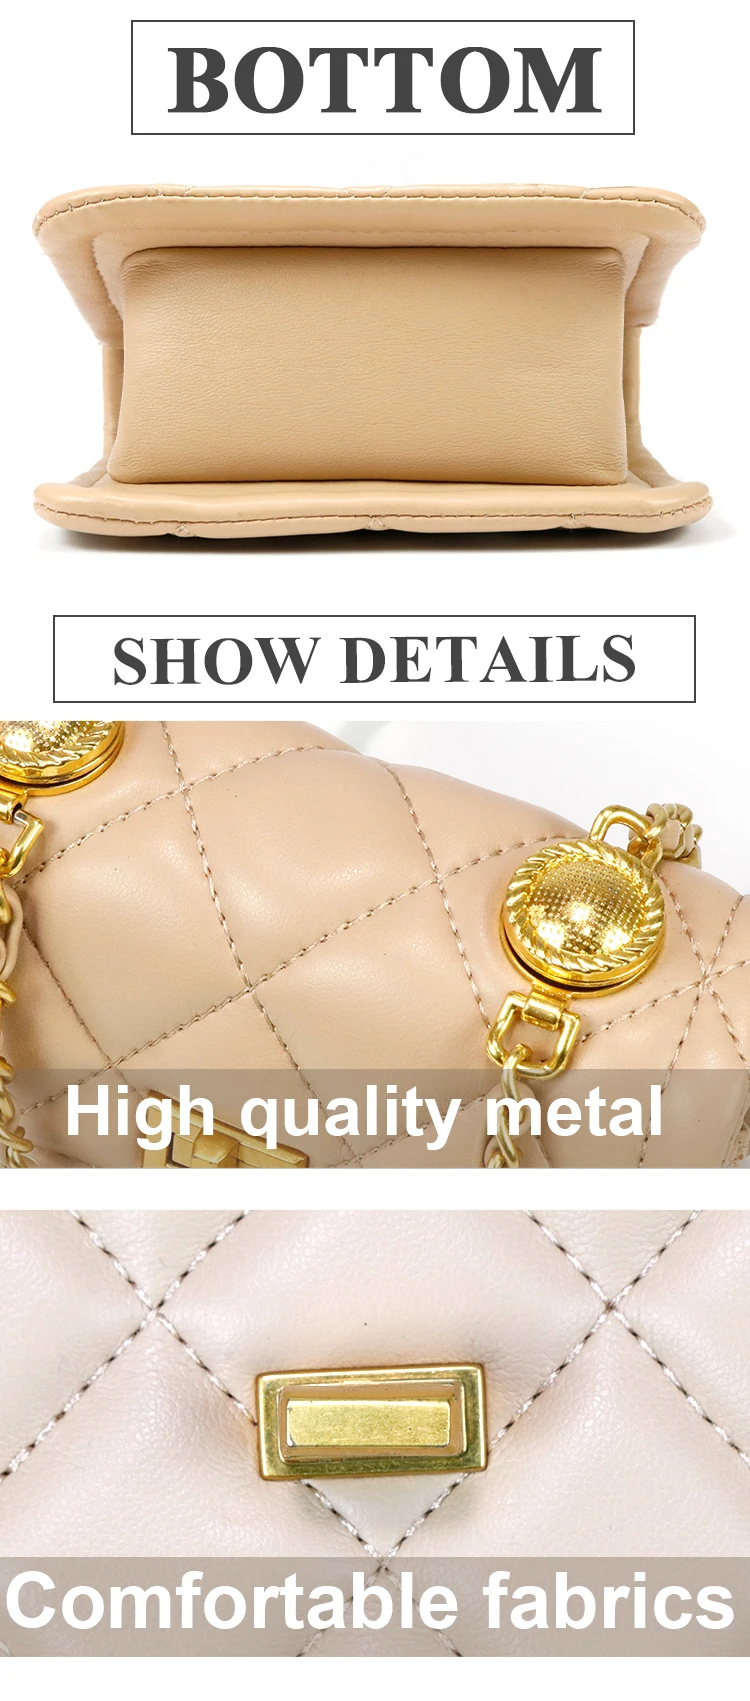 Womens Fashion Designer Shoulder Bags with Gold Chain Strap